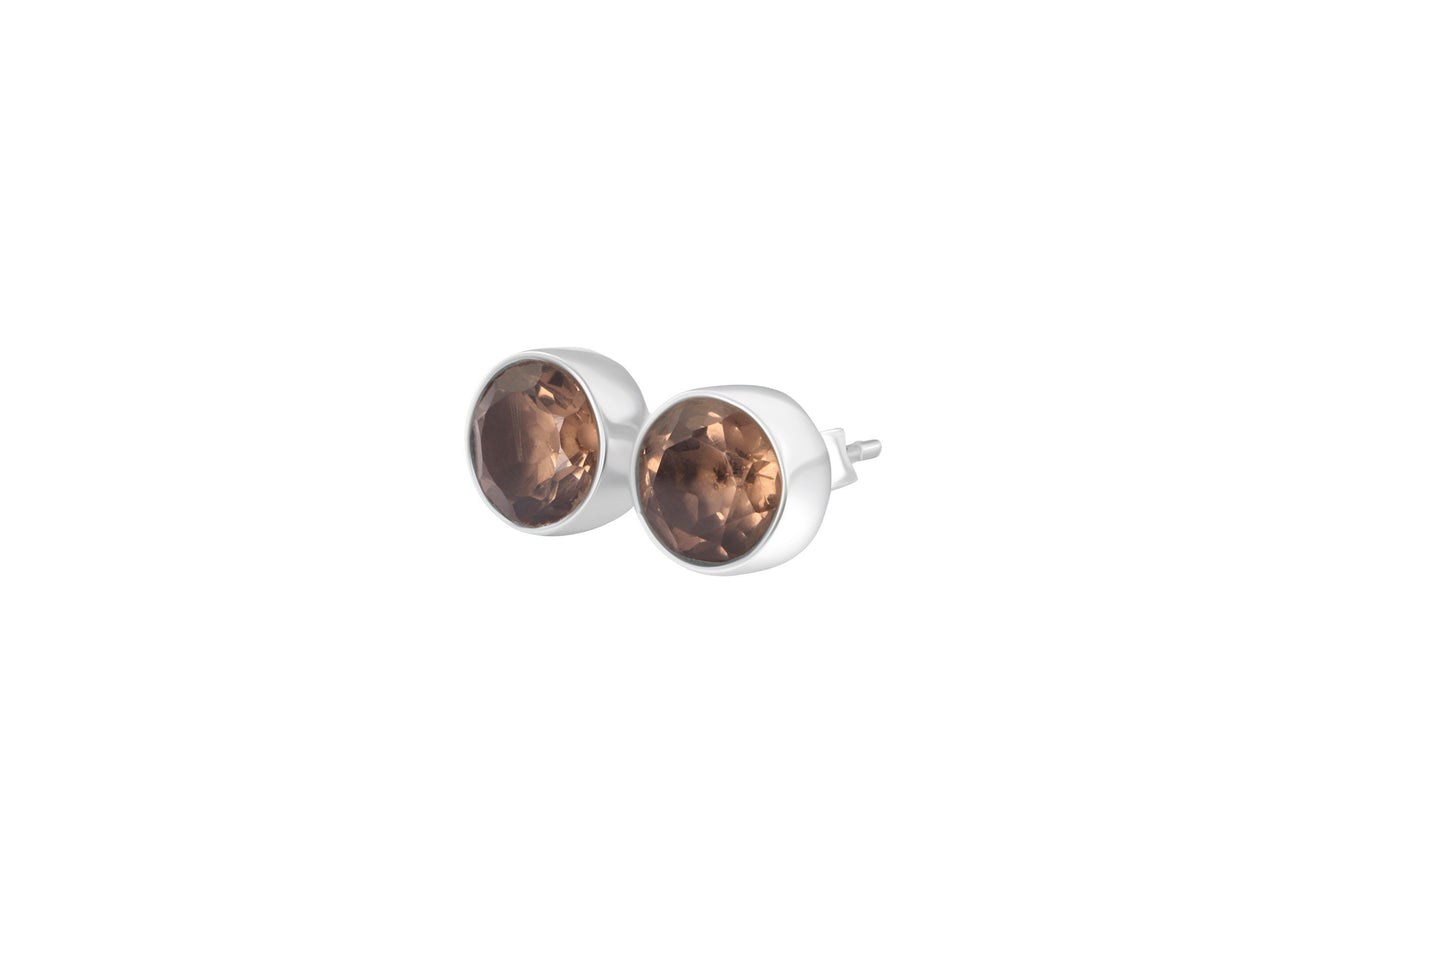 Round shaped natural brown smoky QUARTZ GEMS 925 Sterling SILVER Stud Earrings, Minimalist design, brown gems stud earrings, Australia, Zorbajewellers